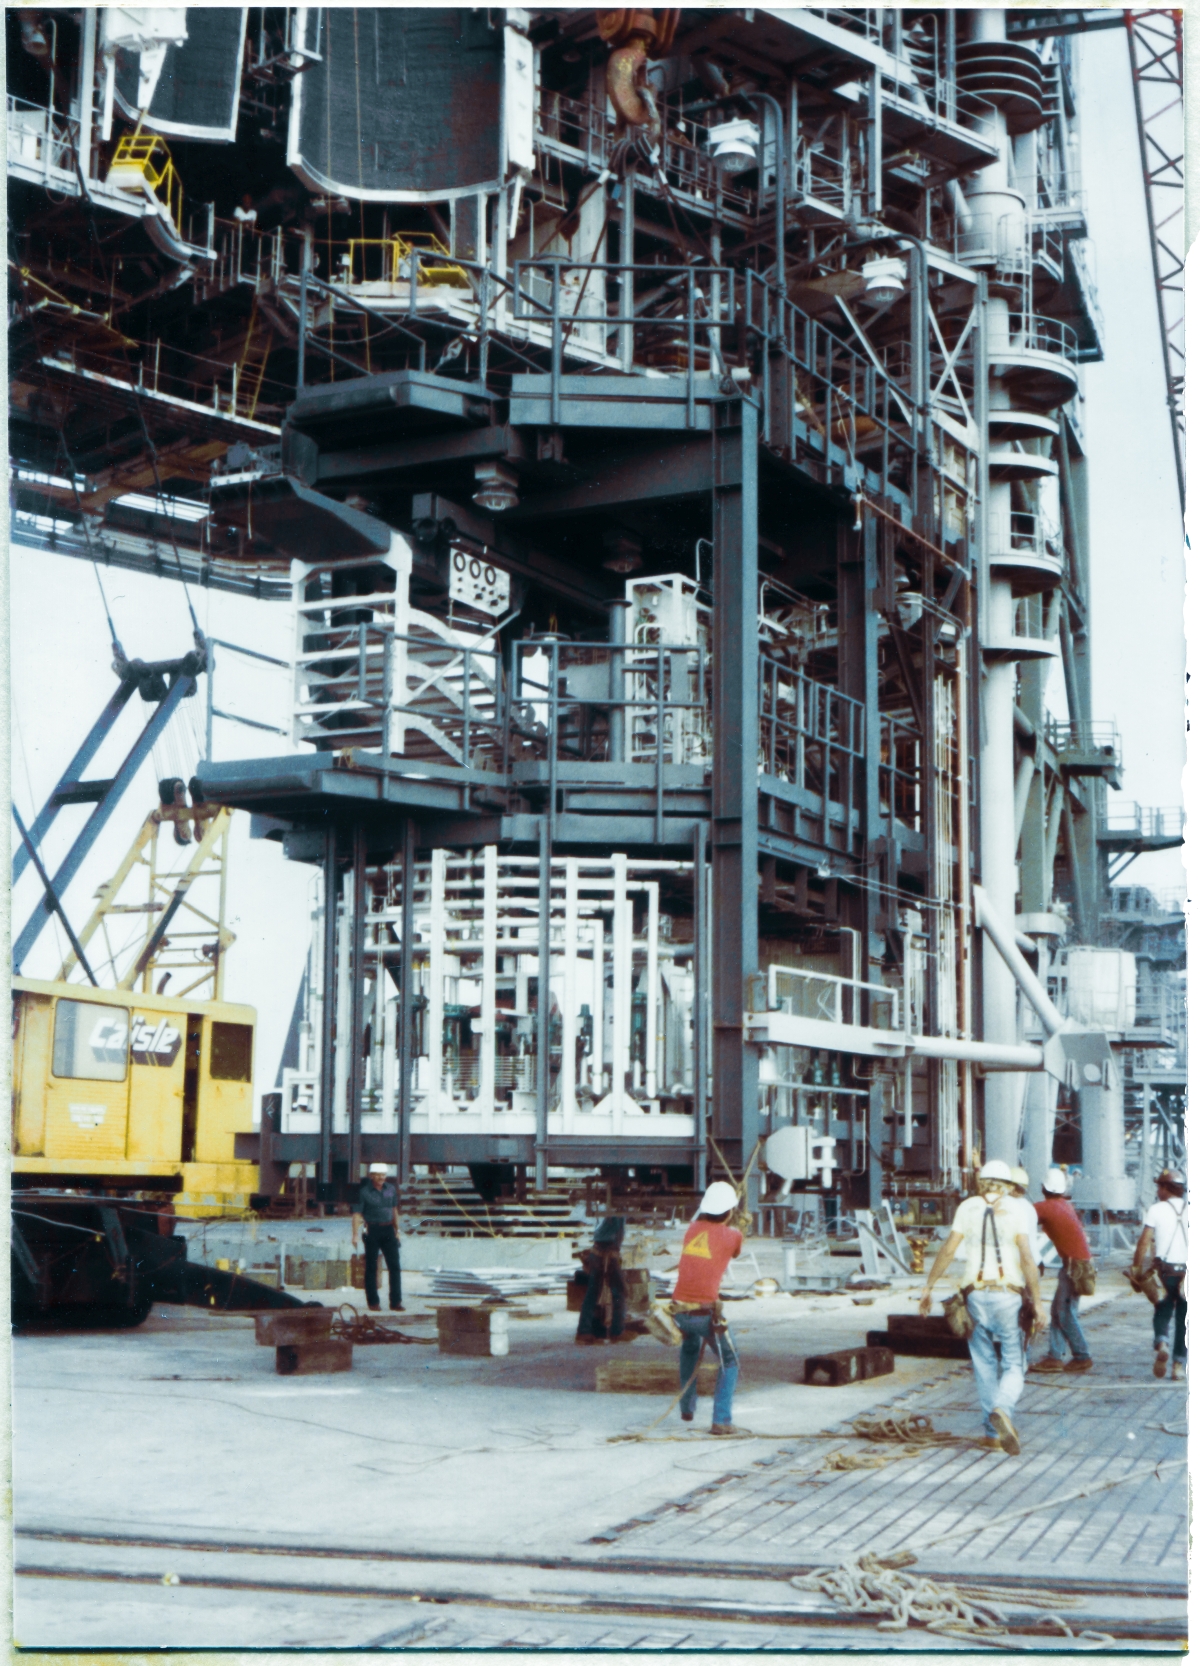 Image 088. Union Ironworkers from Local 808, working for Ivey Steel at Space Shuttle Launch Complex 39-B, Kennedy Space Center, Florida, are hands-on with the OMBUU after it was handed off from the smaller crane which took it from its original position on the Pad Deck near Column Line 7 under the RSS, and connected to the big Manitowoc which is going to take it up to its final elevation, well over a hundred feet above where you see it in this photograph. The crane operator continues to work it northward across the Pad Deck, but very soon it will begin moving vertically, once they get it to the place directly beneath where it needs to be lifted straight up from. Once it has been lifted to its final elevation, things will be very carefully looked over, making sure all clearances and fits are properly maintained and aligned, and then it will be very gently swung in toward the face of the RSS, where the ironworkers, working with the crane operator, will fine-position it and bolt it into place against the connection plates it will be attached to. Photo by James MacLaren.